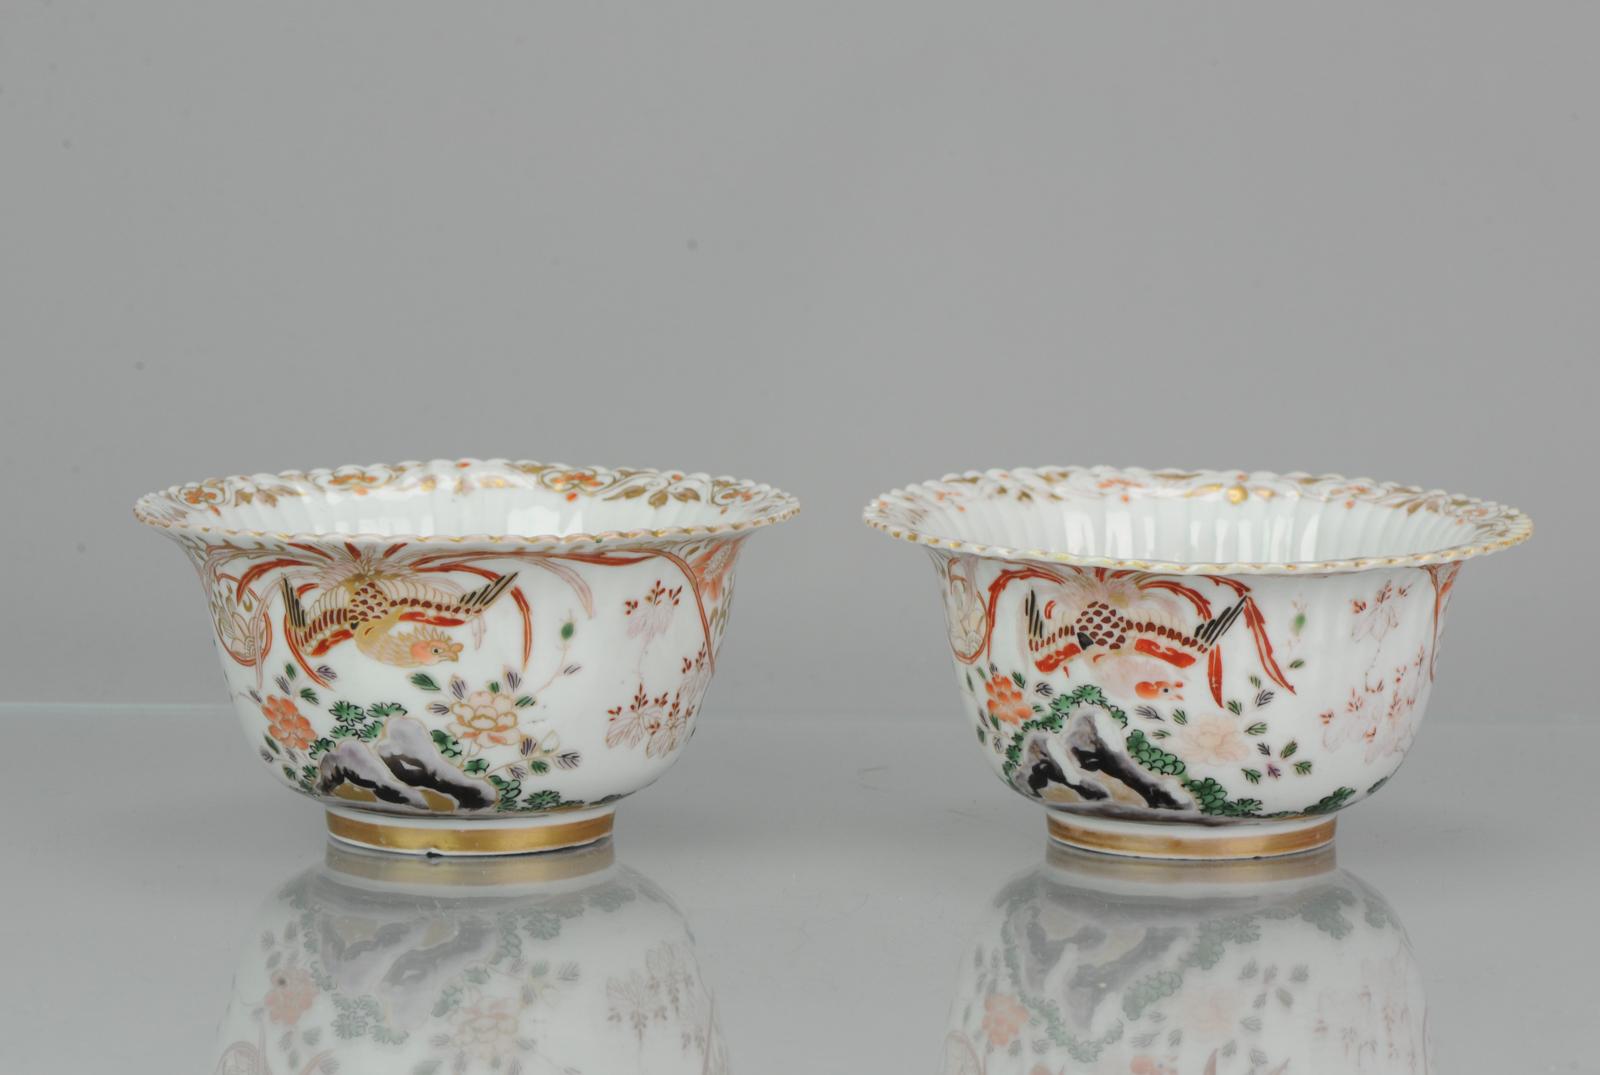 Pair Antique 18th C Japanese Imari Gold Bowl Japan Figure Edo Period In Good Condition For Sale In Amsterdam, Noord Holland